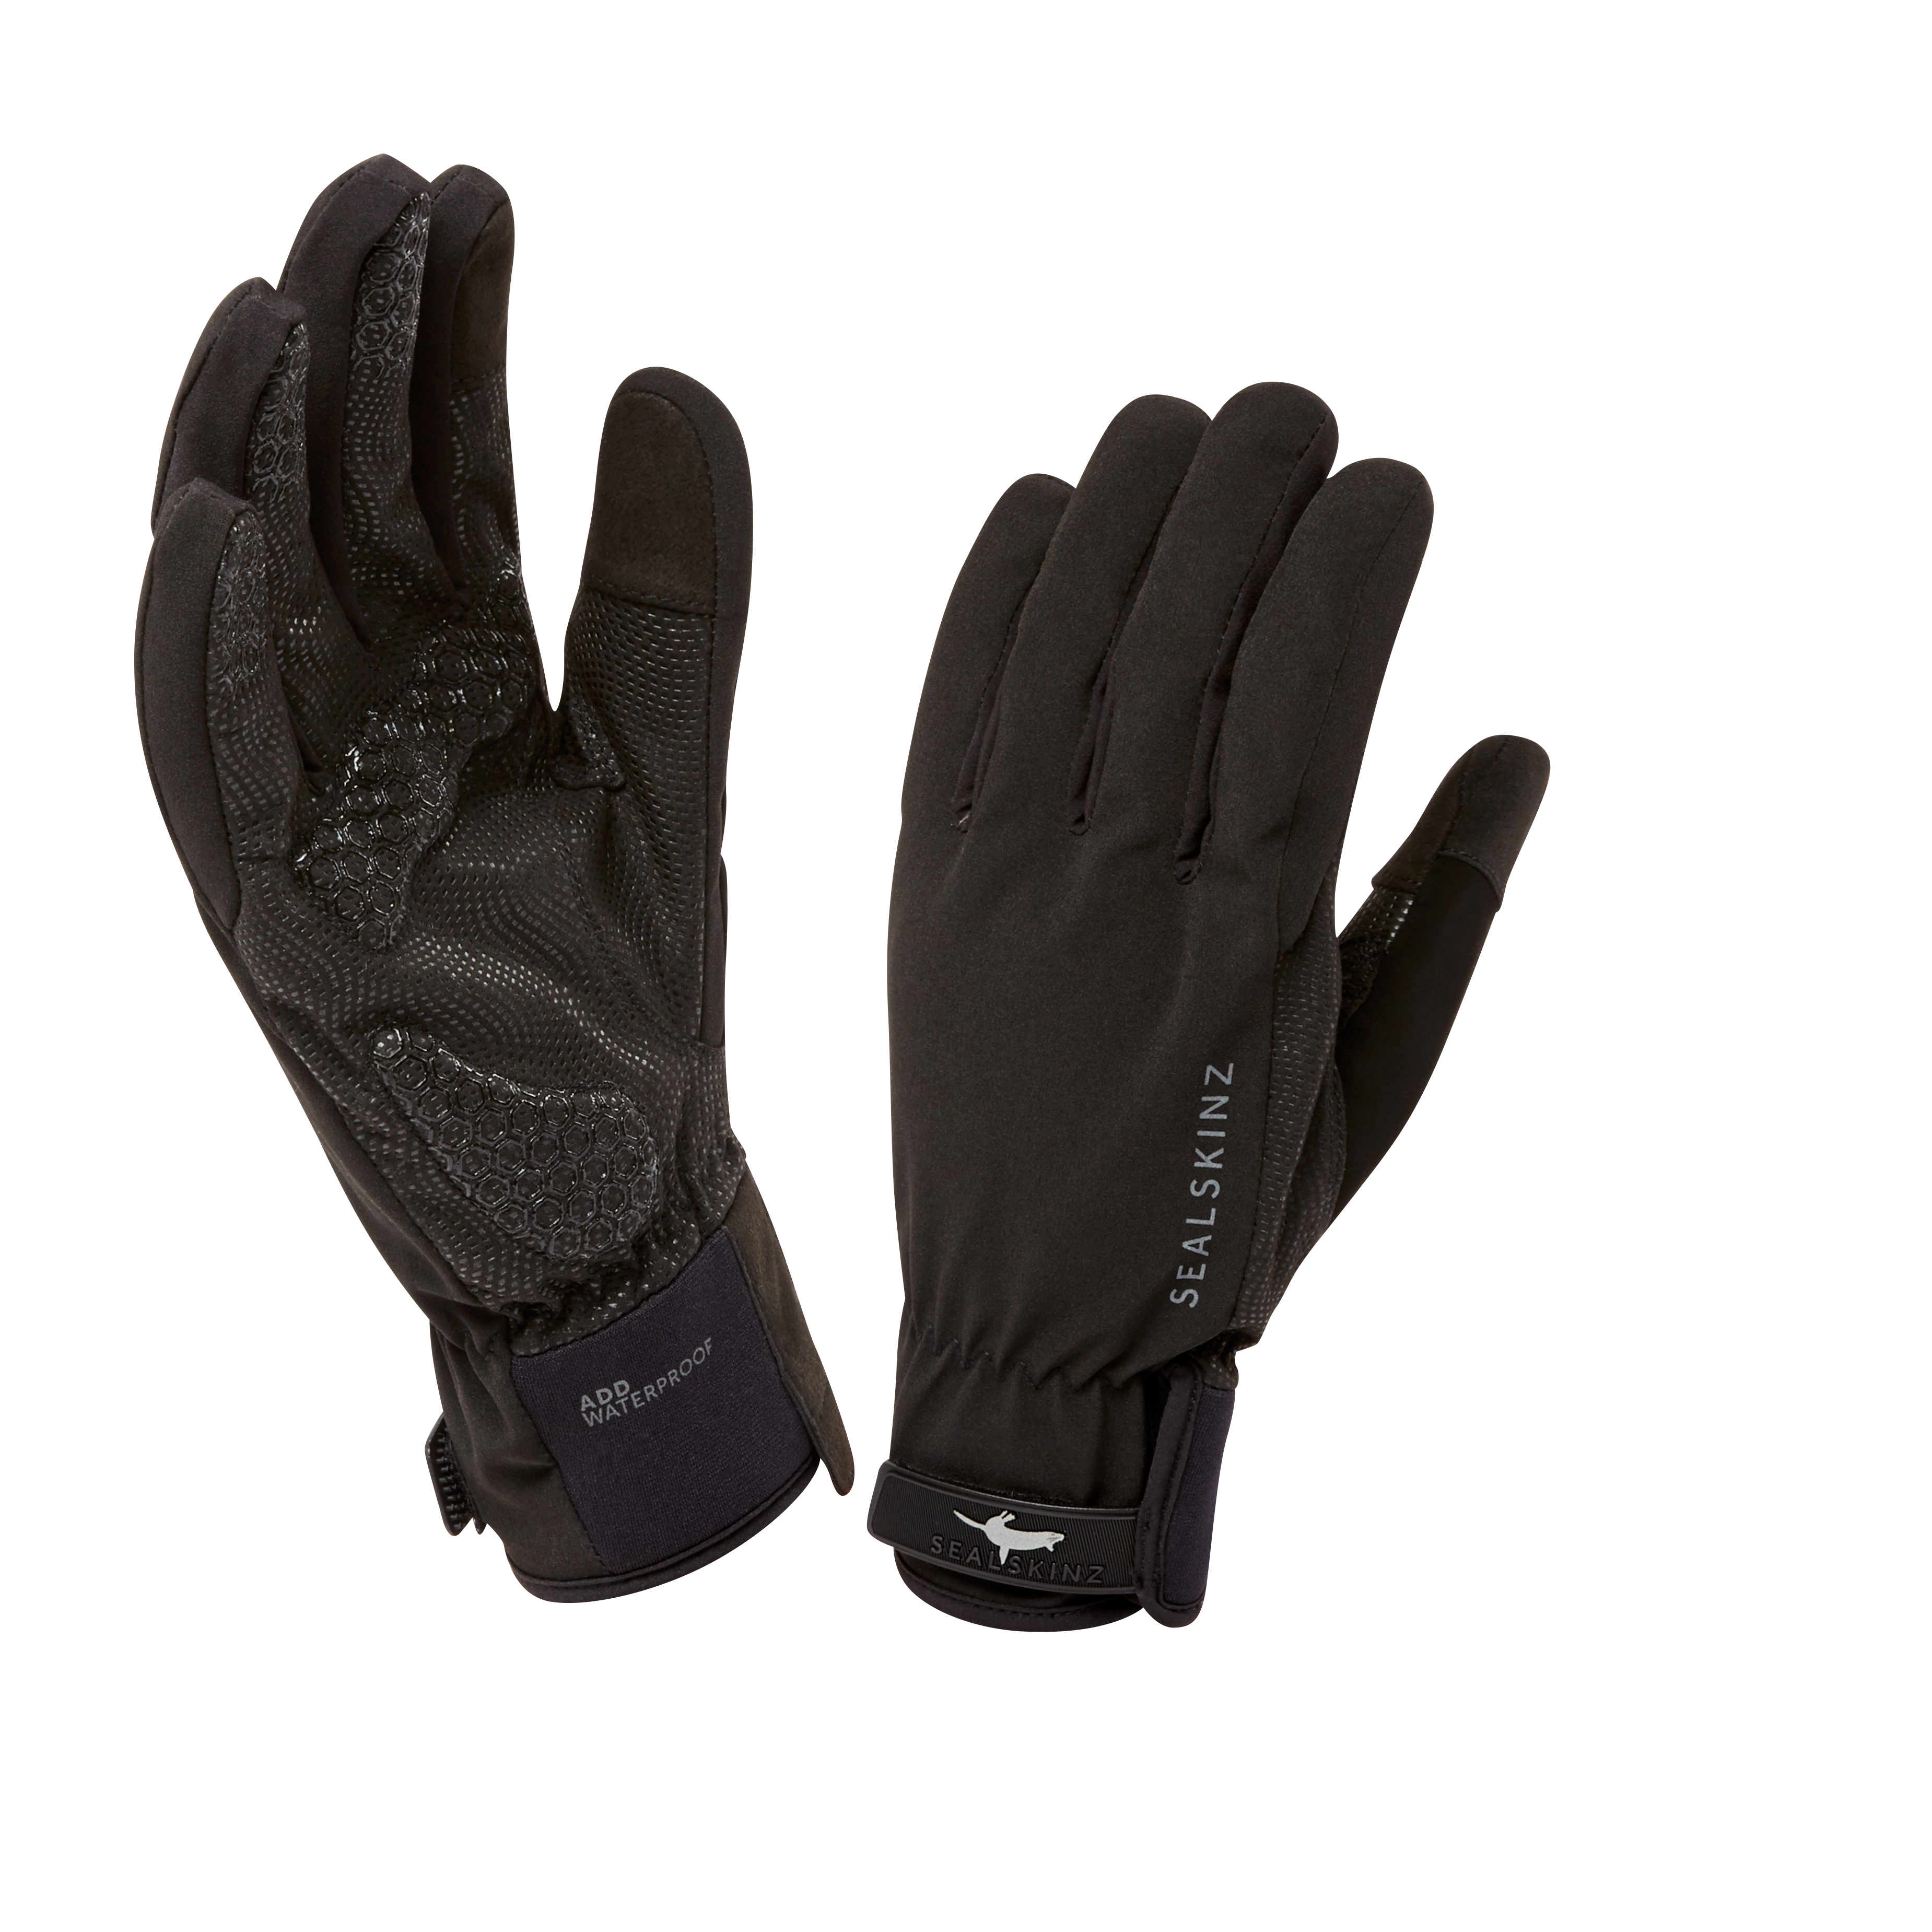 Sealskinz Mens All Weather Cycle Xp Gloves - Black - S